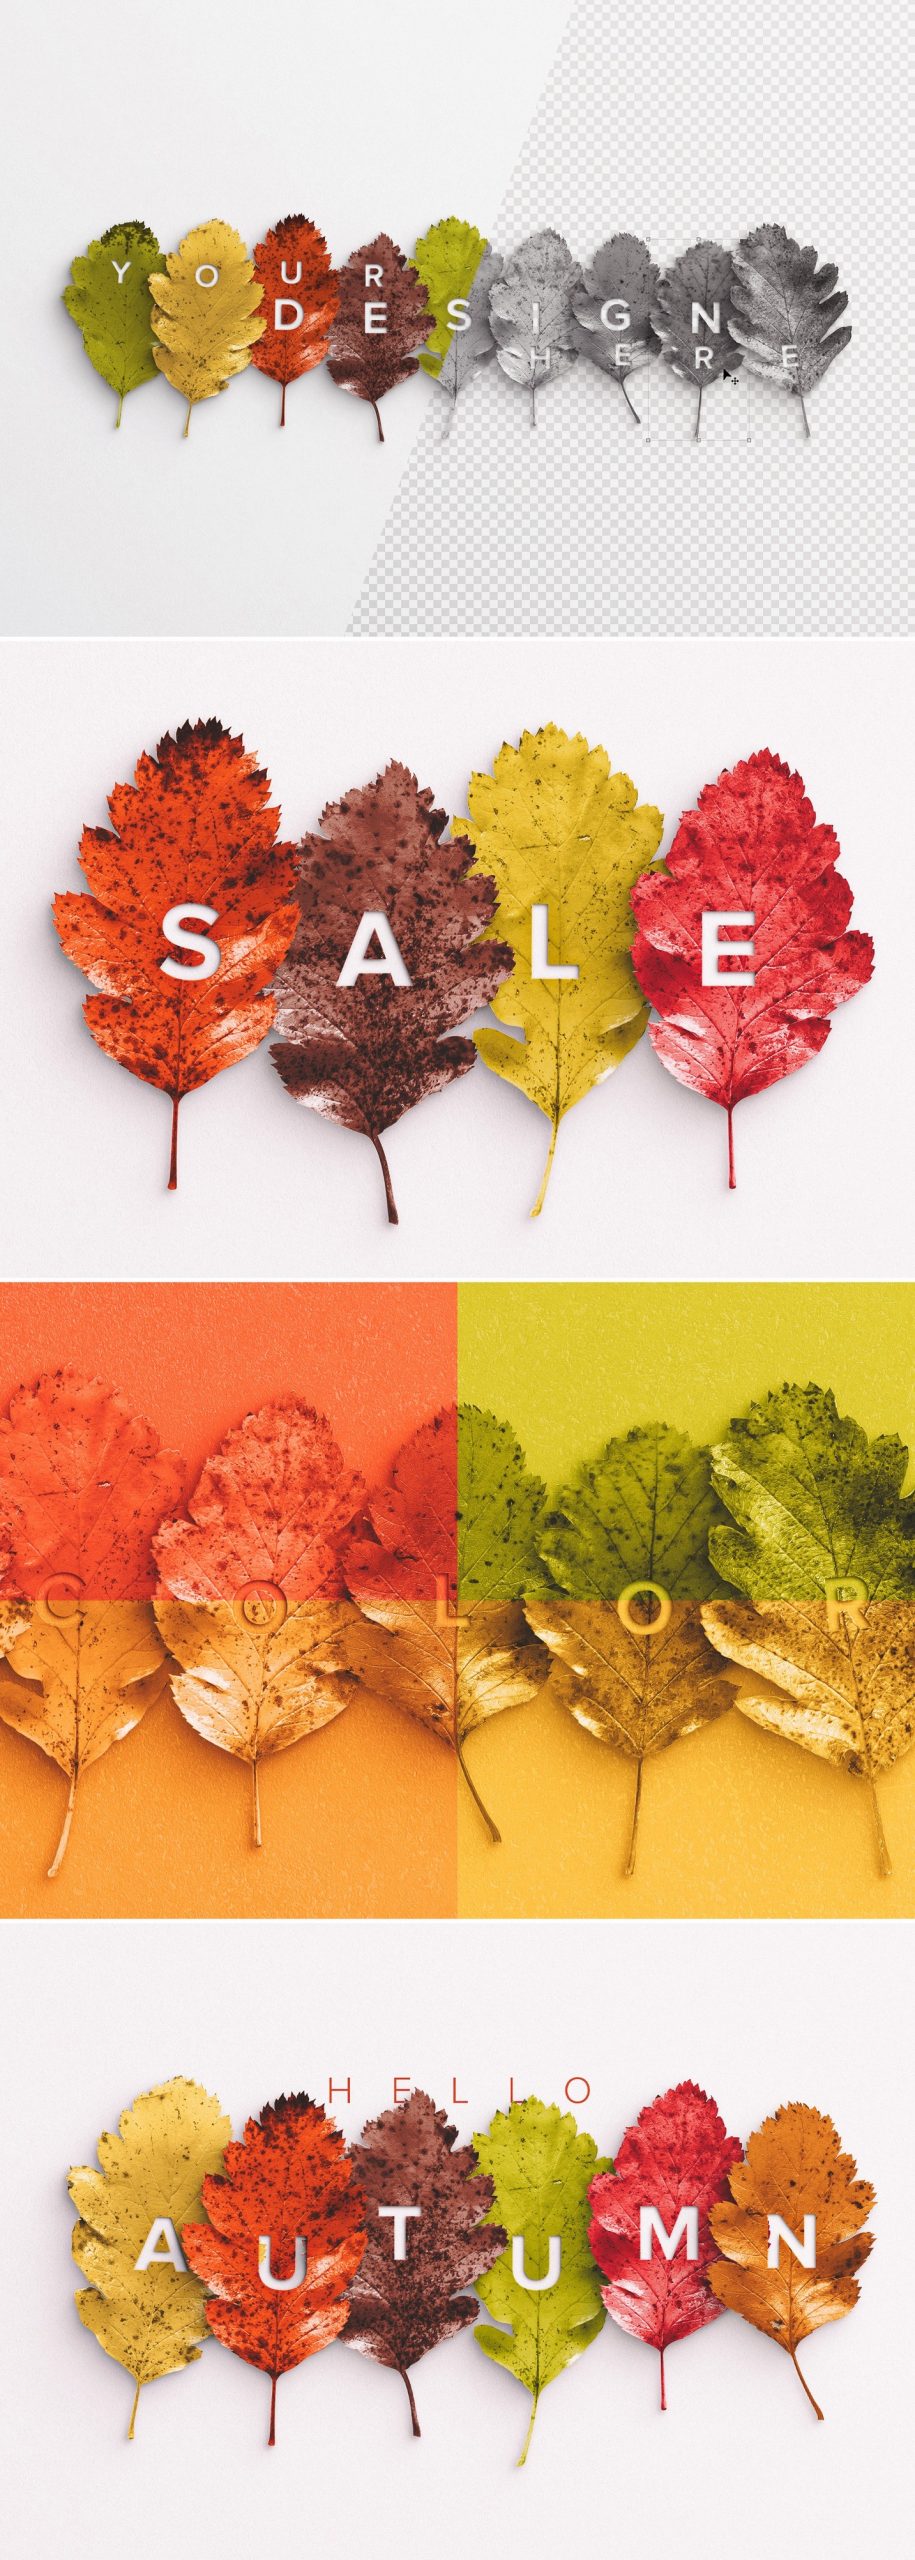 autumn leaves mockup preview1 1 scaled